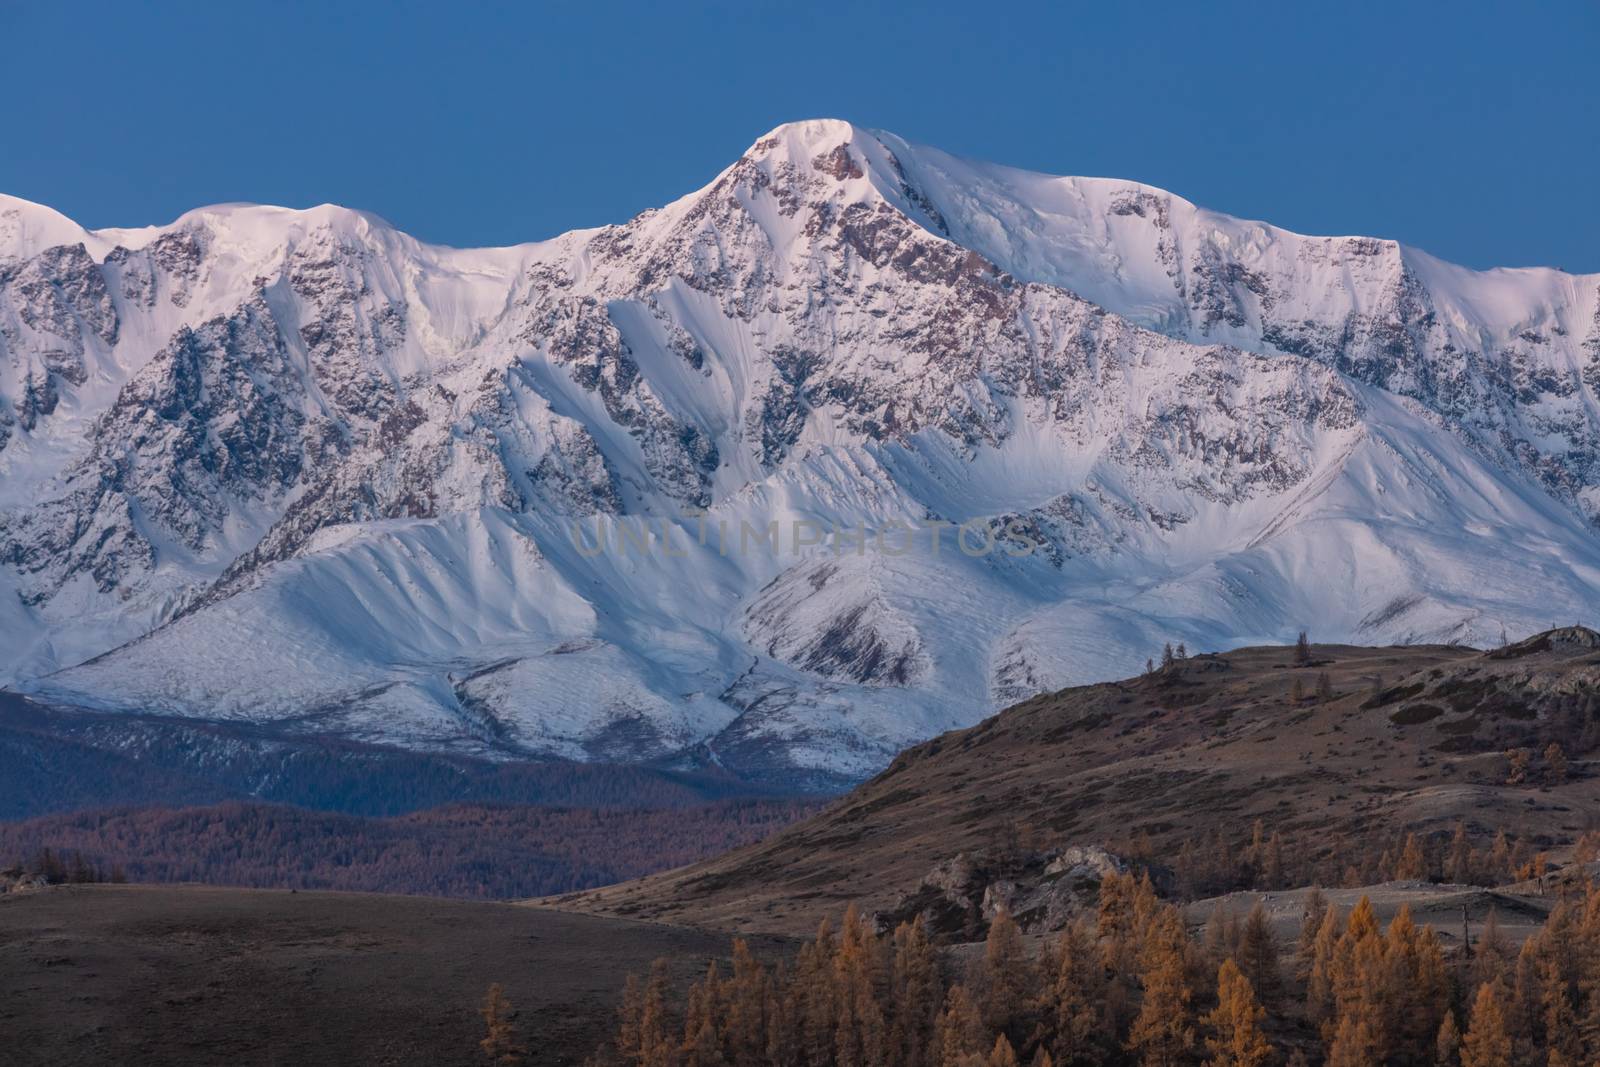 Beautiful shot of a white snowy mountain and hills with trees in the foreground. Fall time. Sunrise. Blue hour. Altai mountains, Russia.